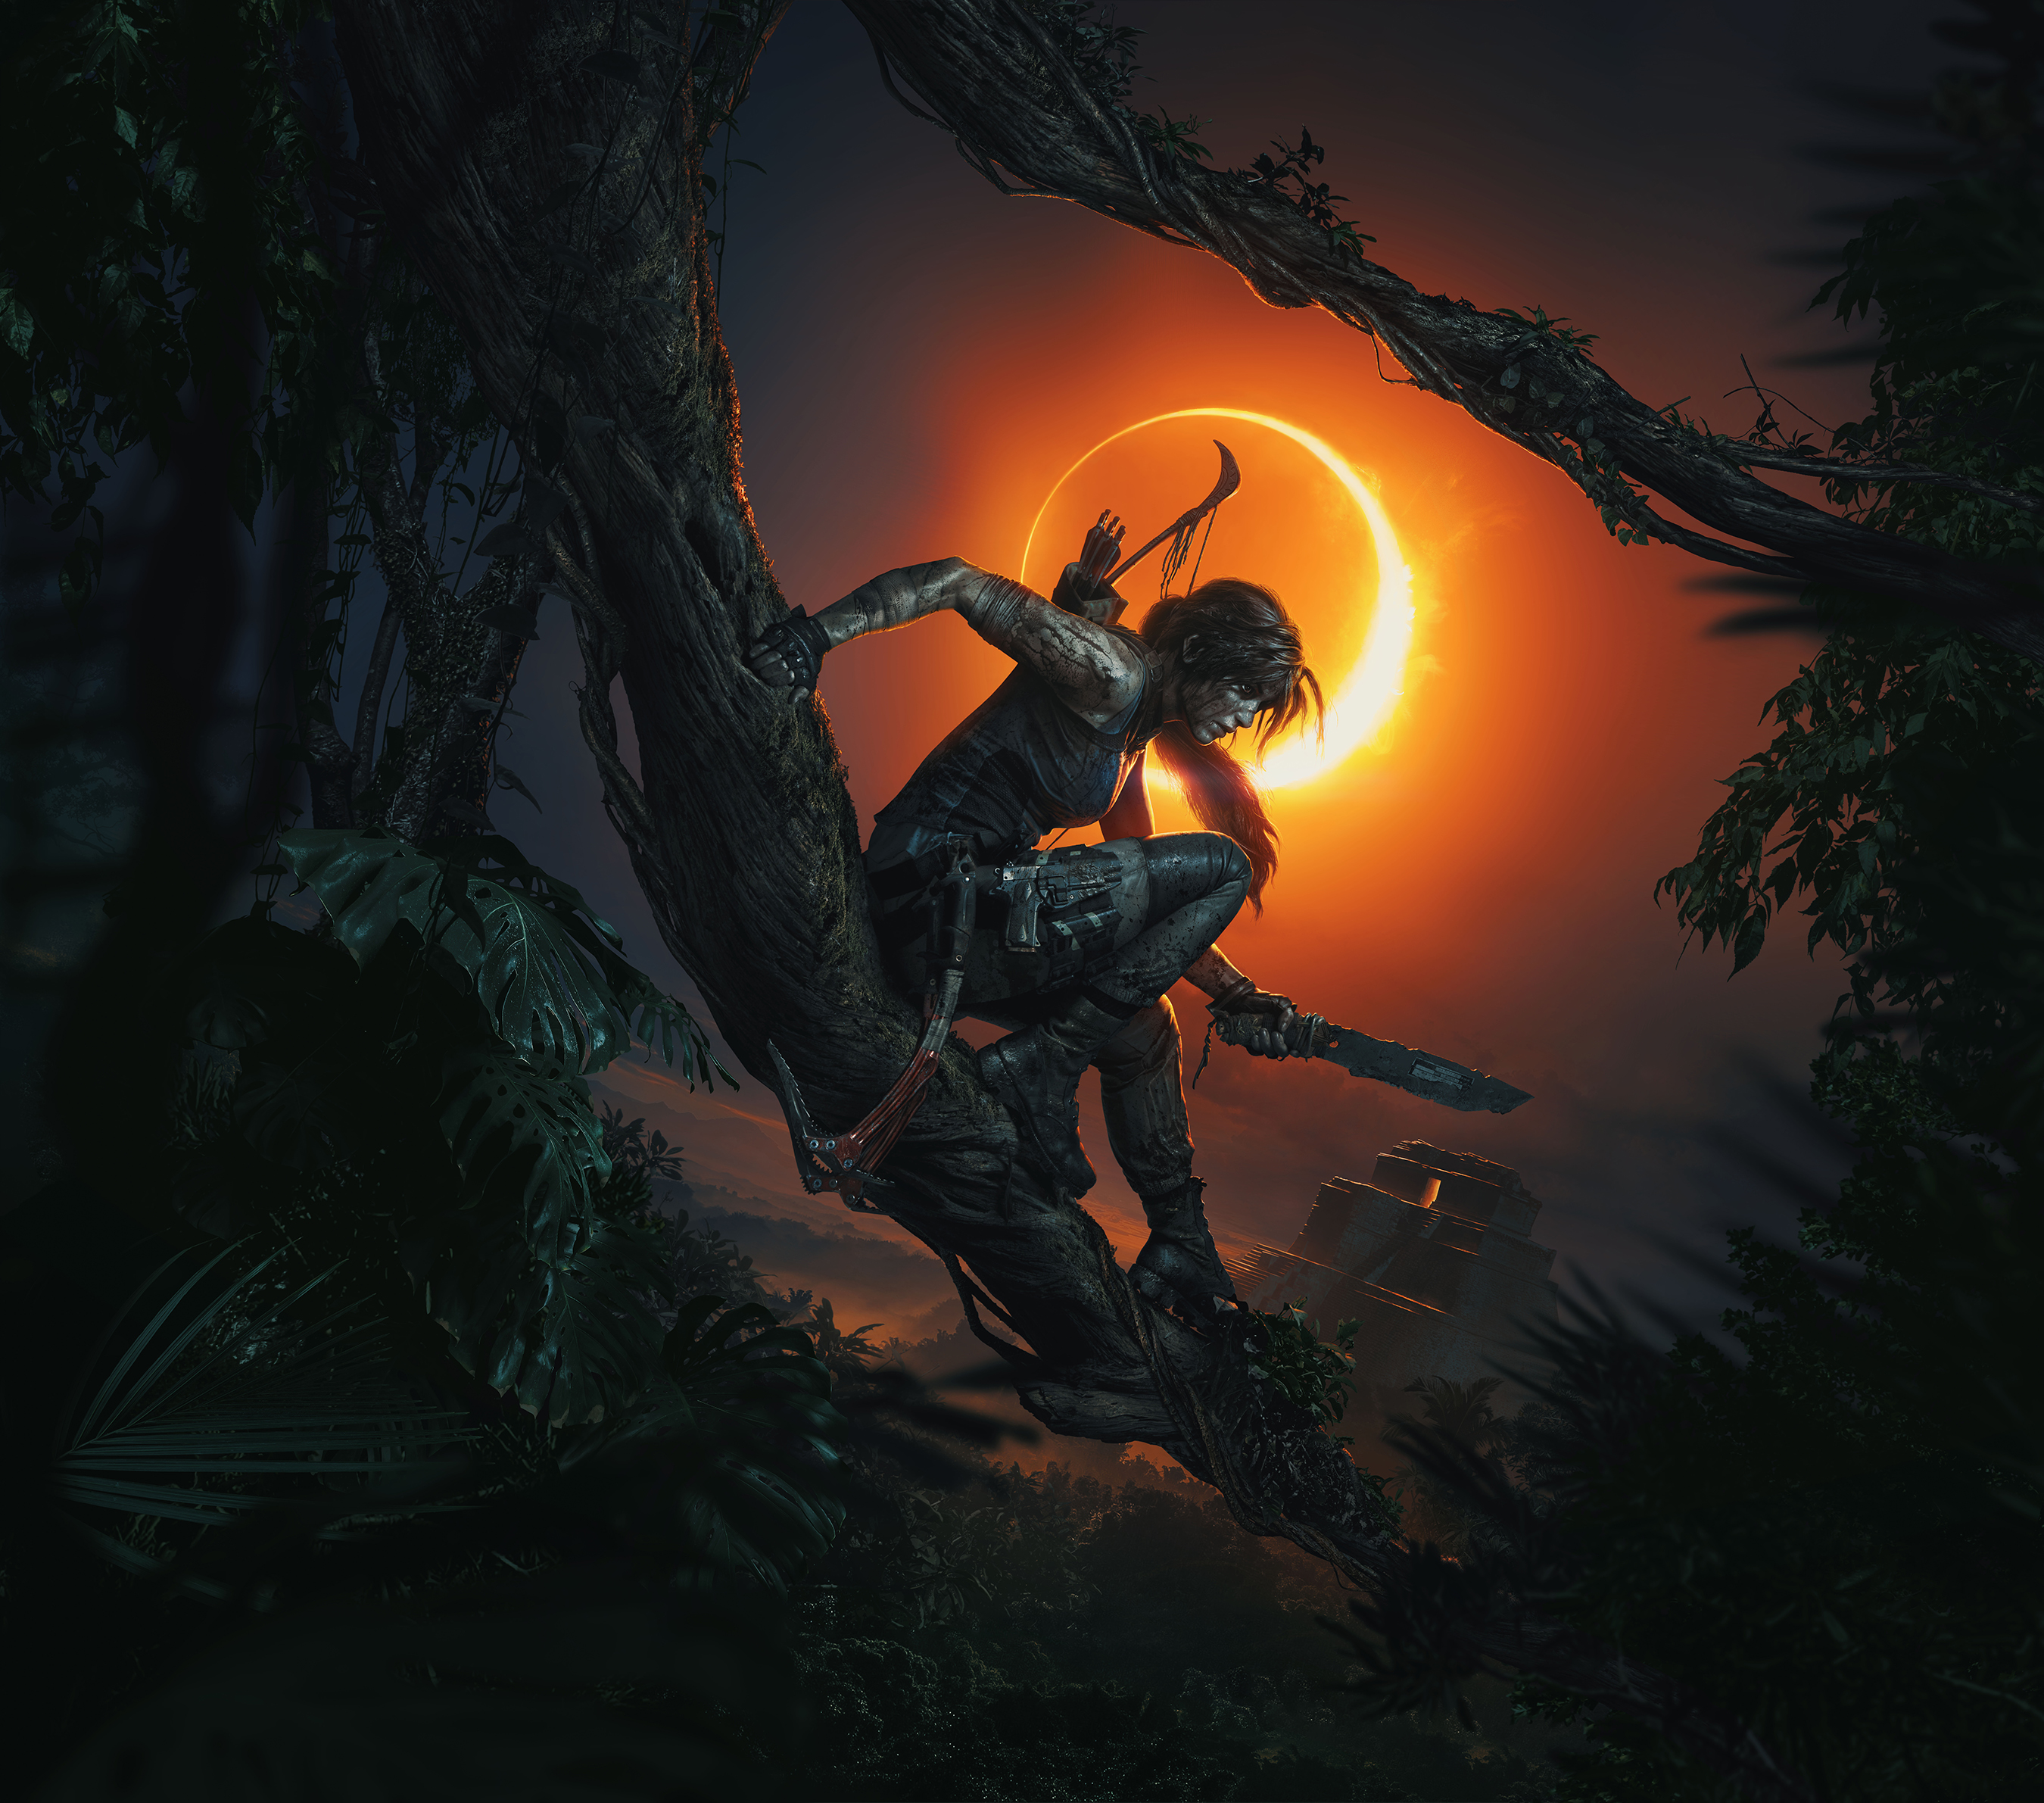 Shadow of The Tomb Raider now available worldwide